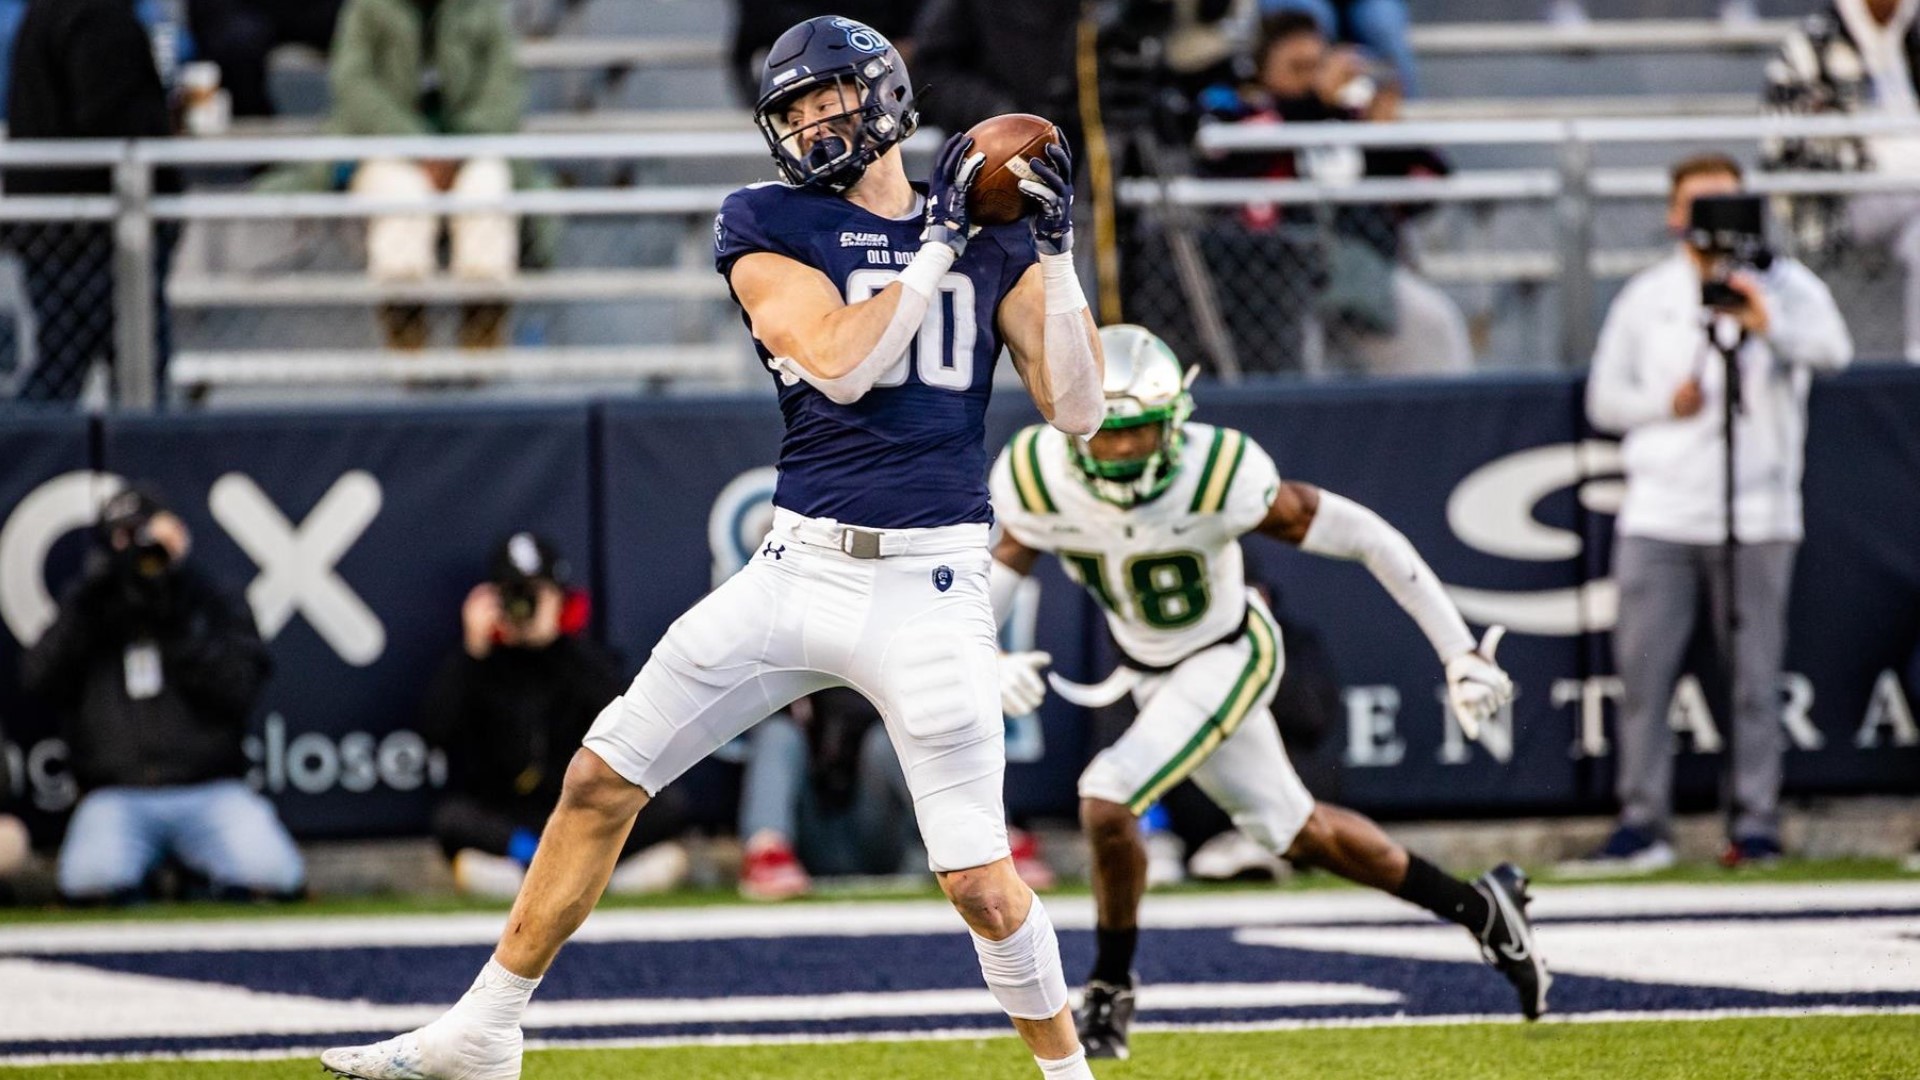 Kuntz in 2021 caught 73 passes for 692 yards and 5 touchdown as he was chosen to the all-Conference USA first team.